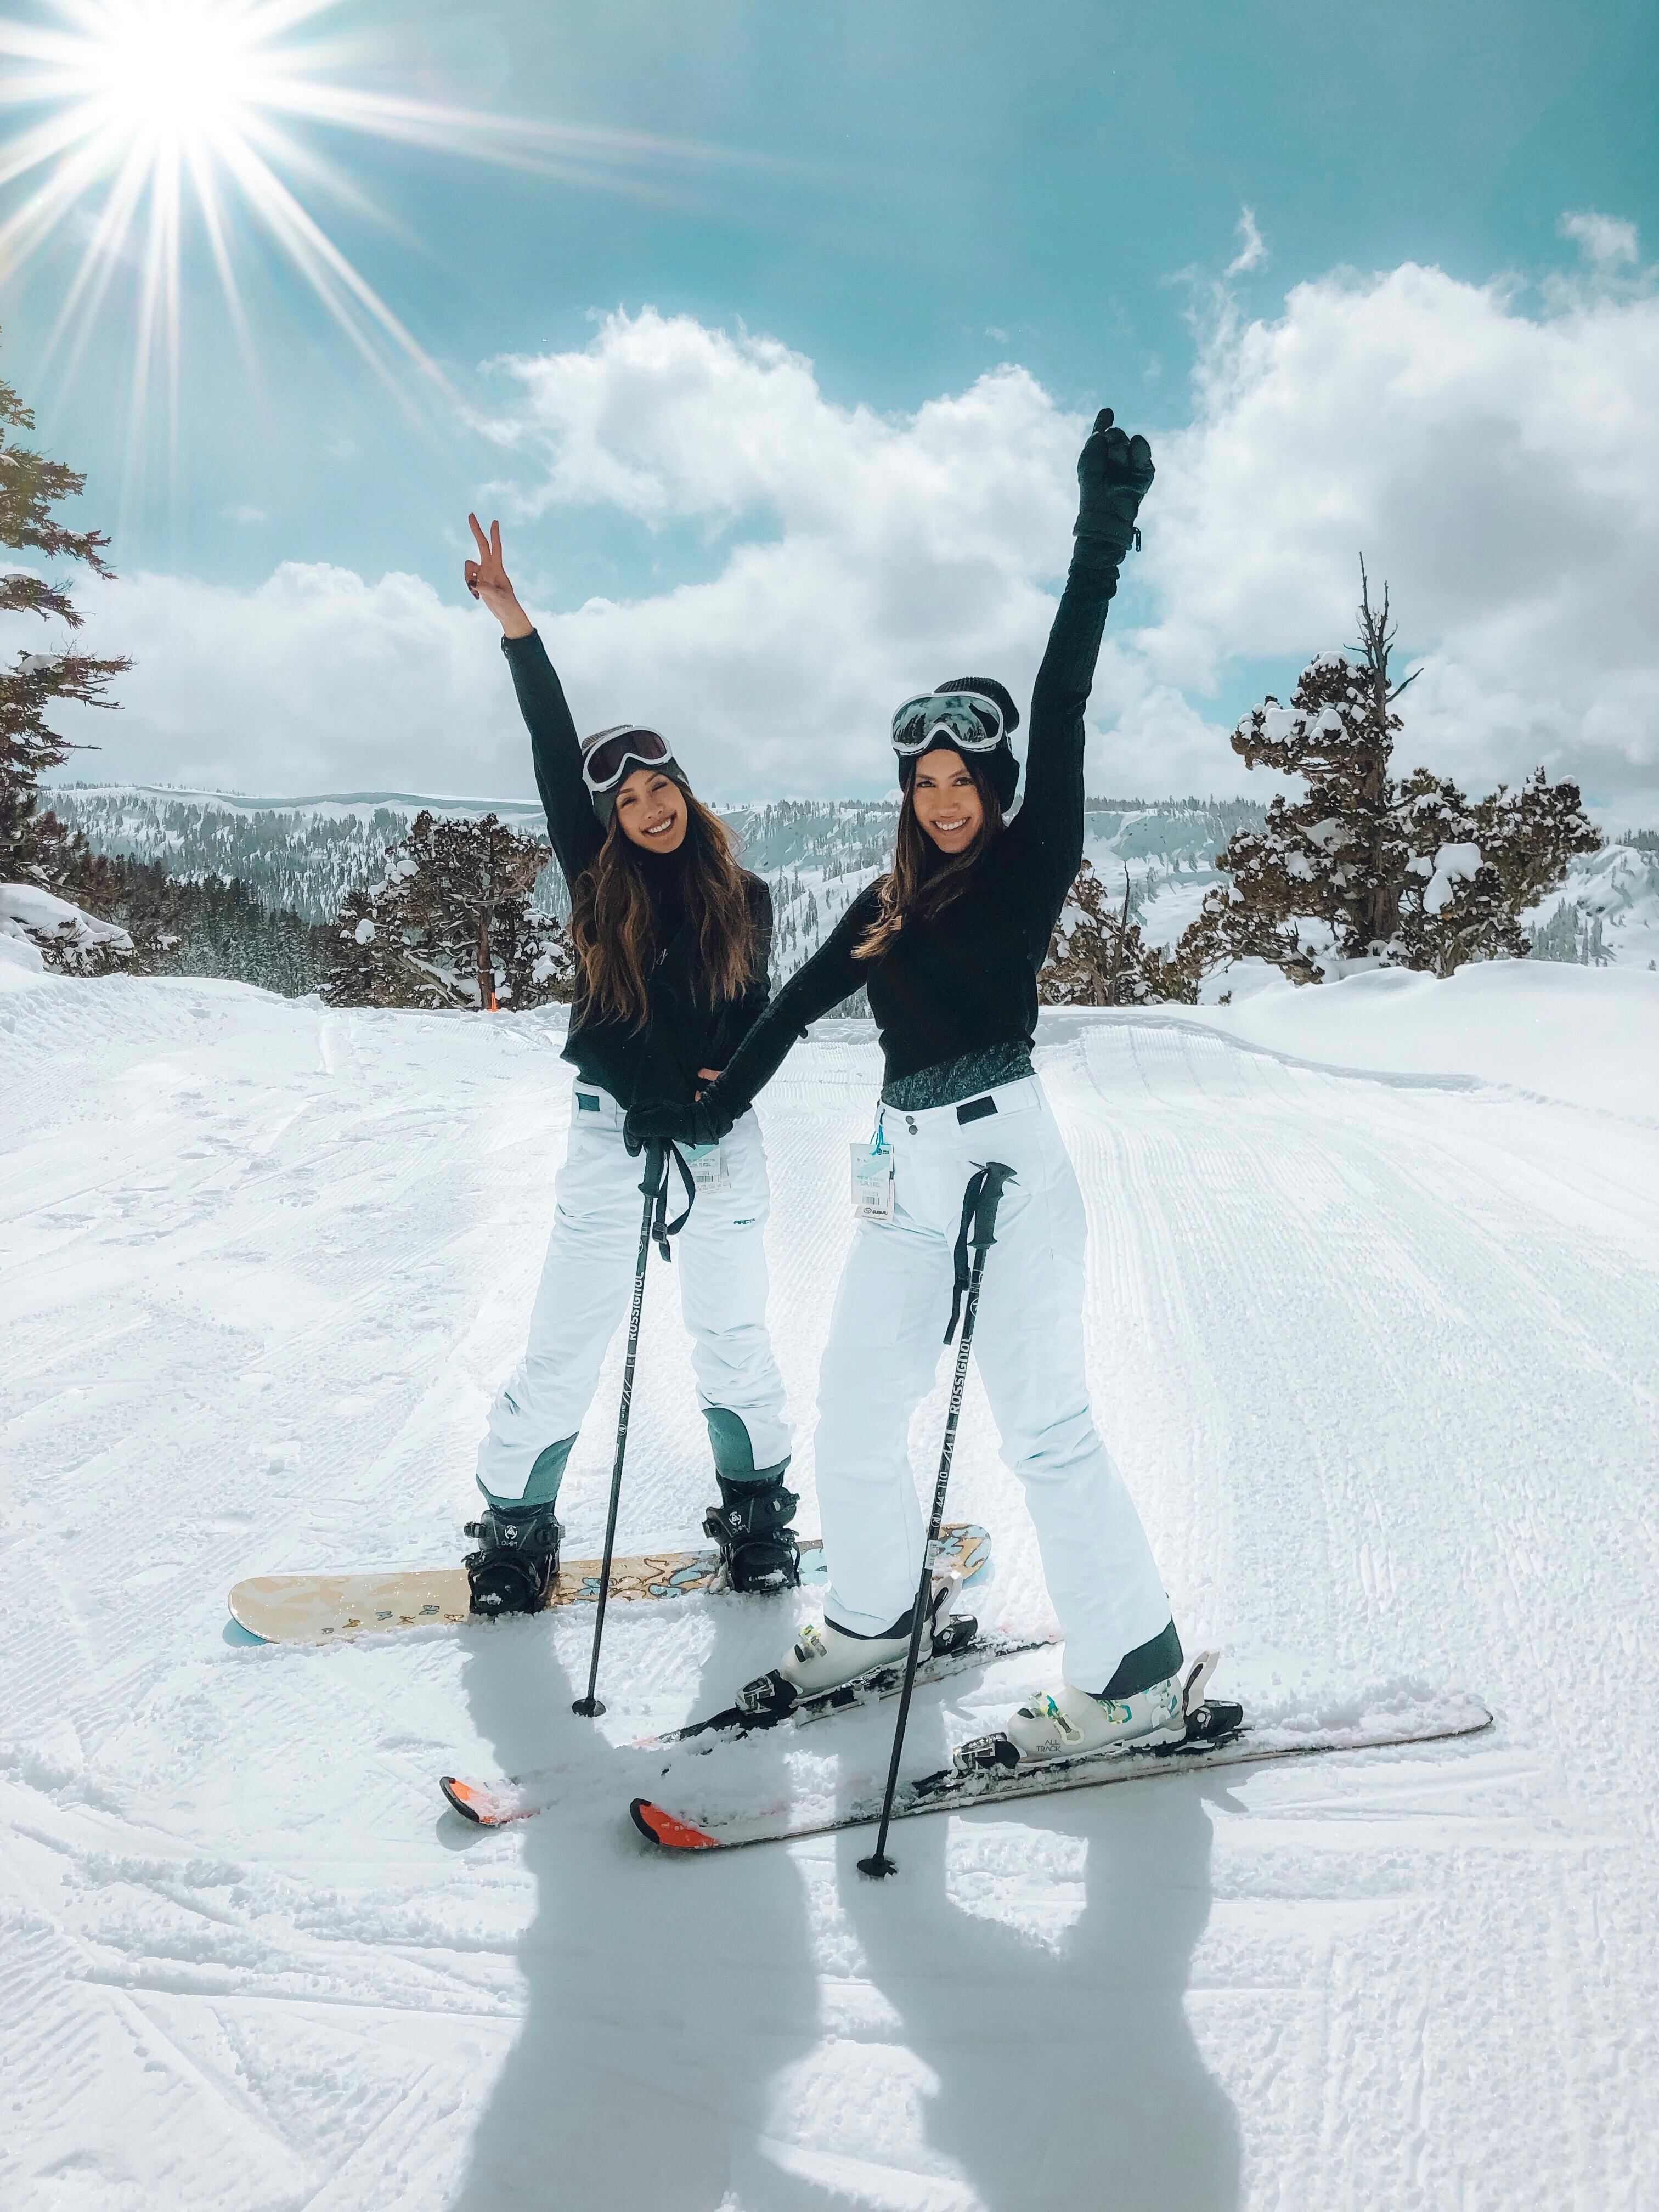 10,089 Cute Ski Girl Royalty-Free Photos and Stock Images